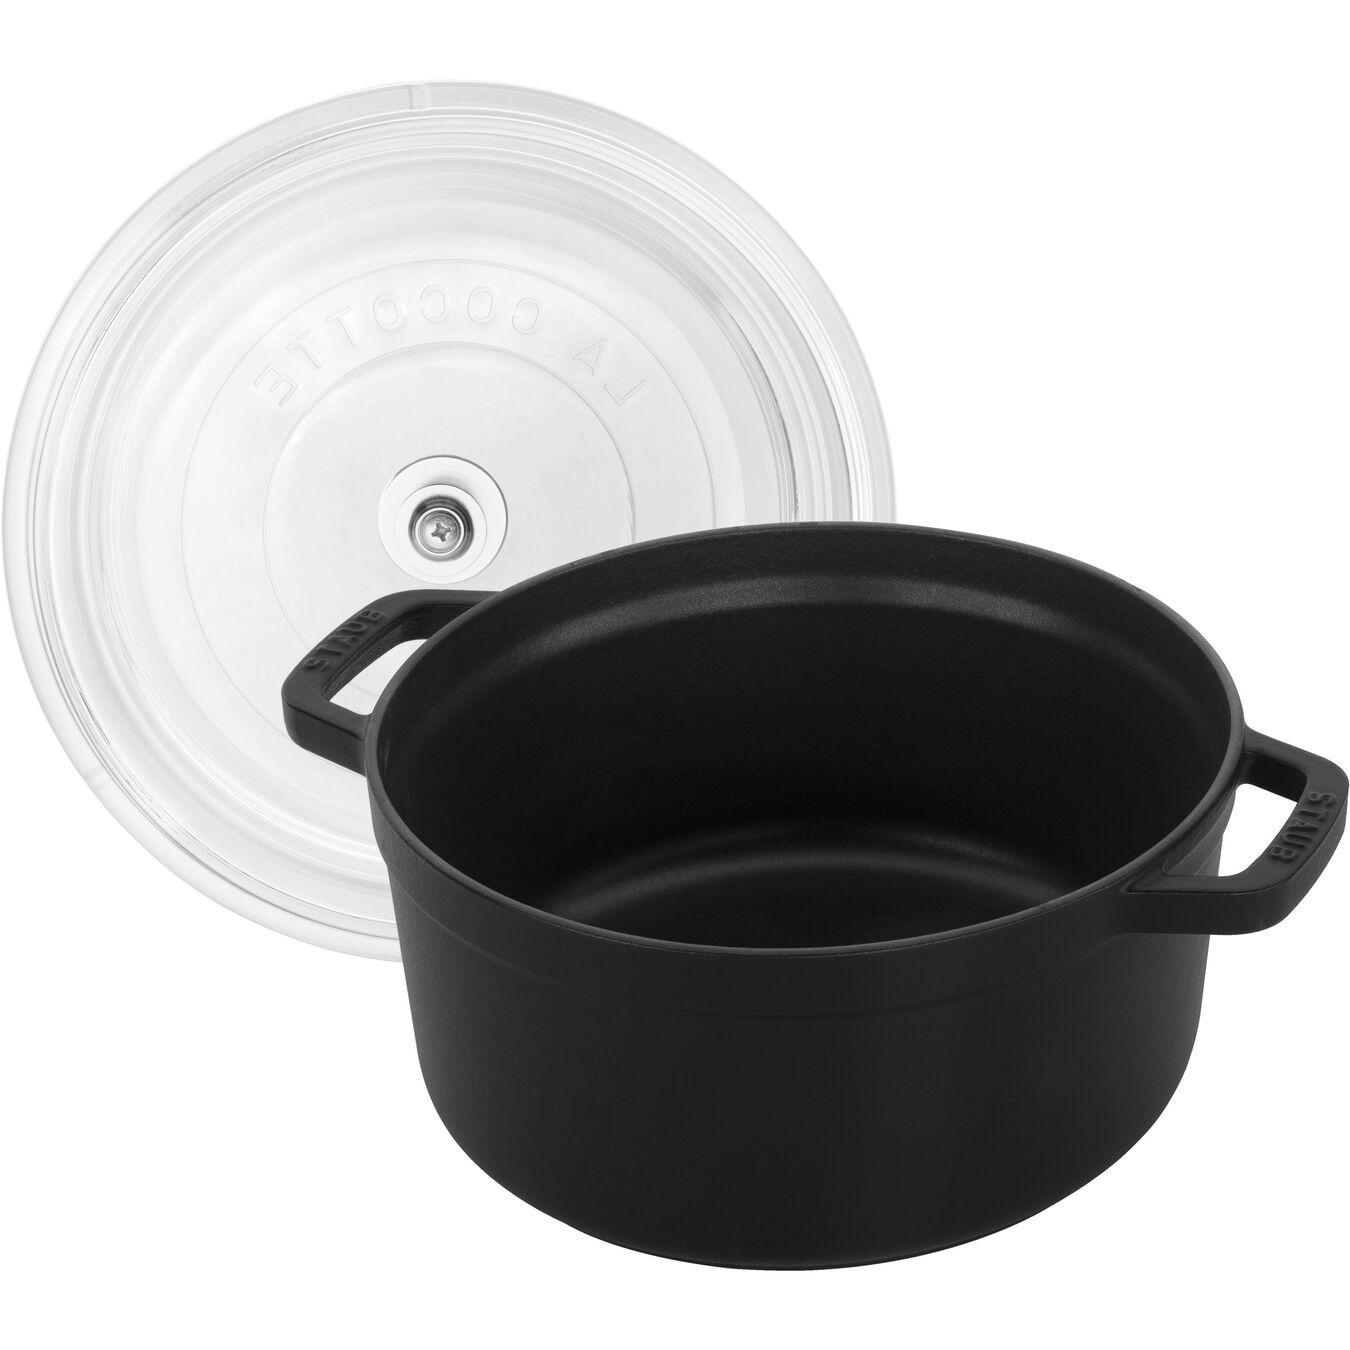 3.8 l cast iron round Cocotte with glass lid, black,,large 3